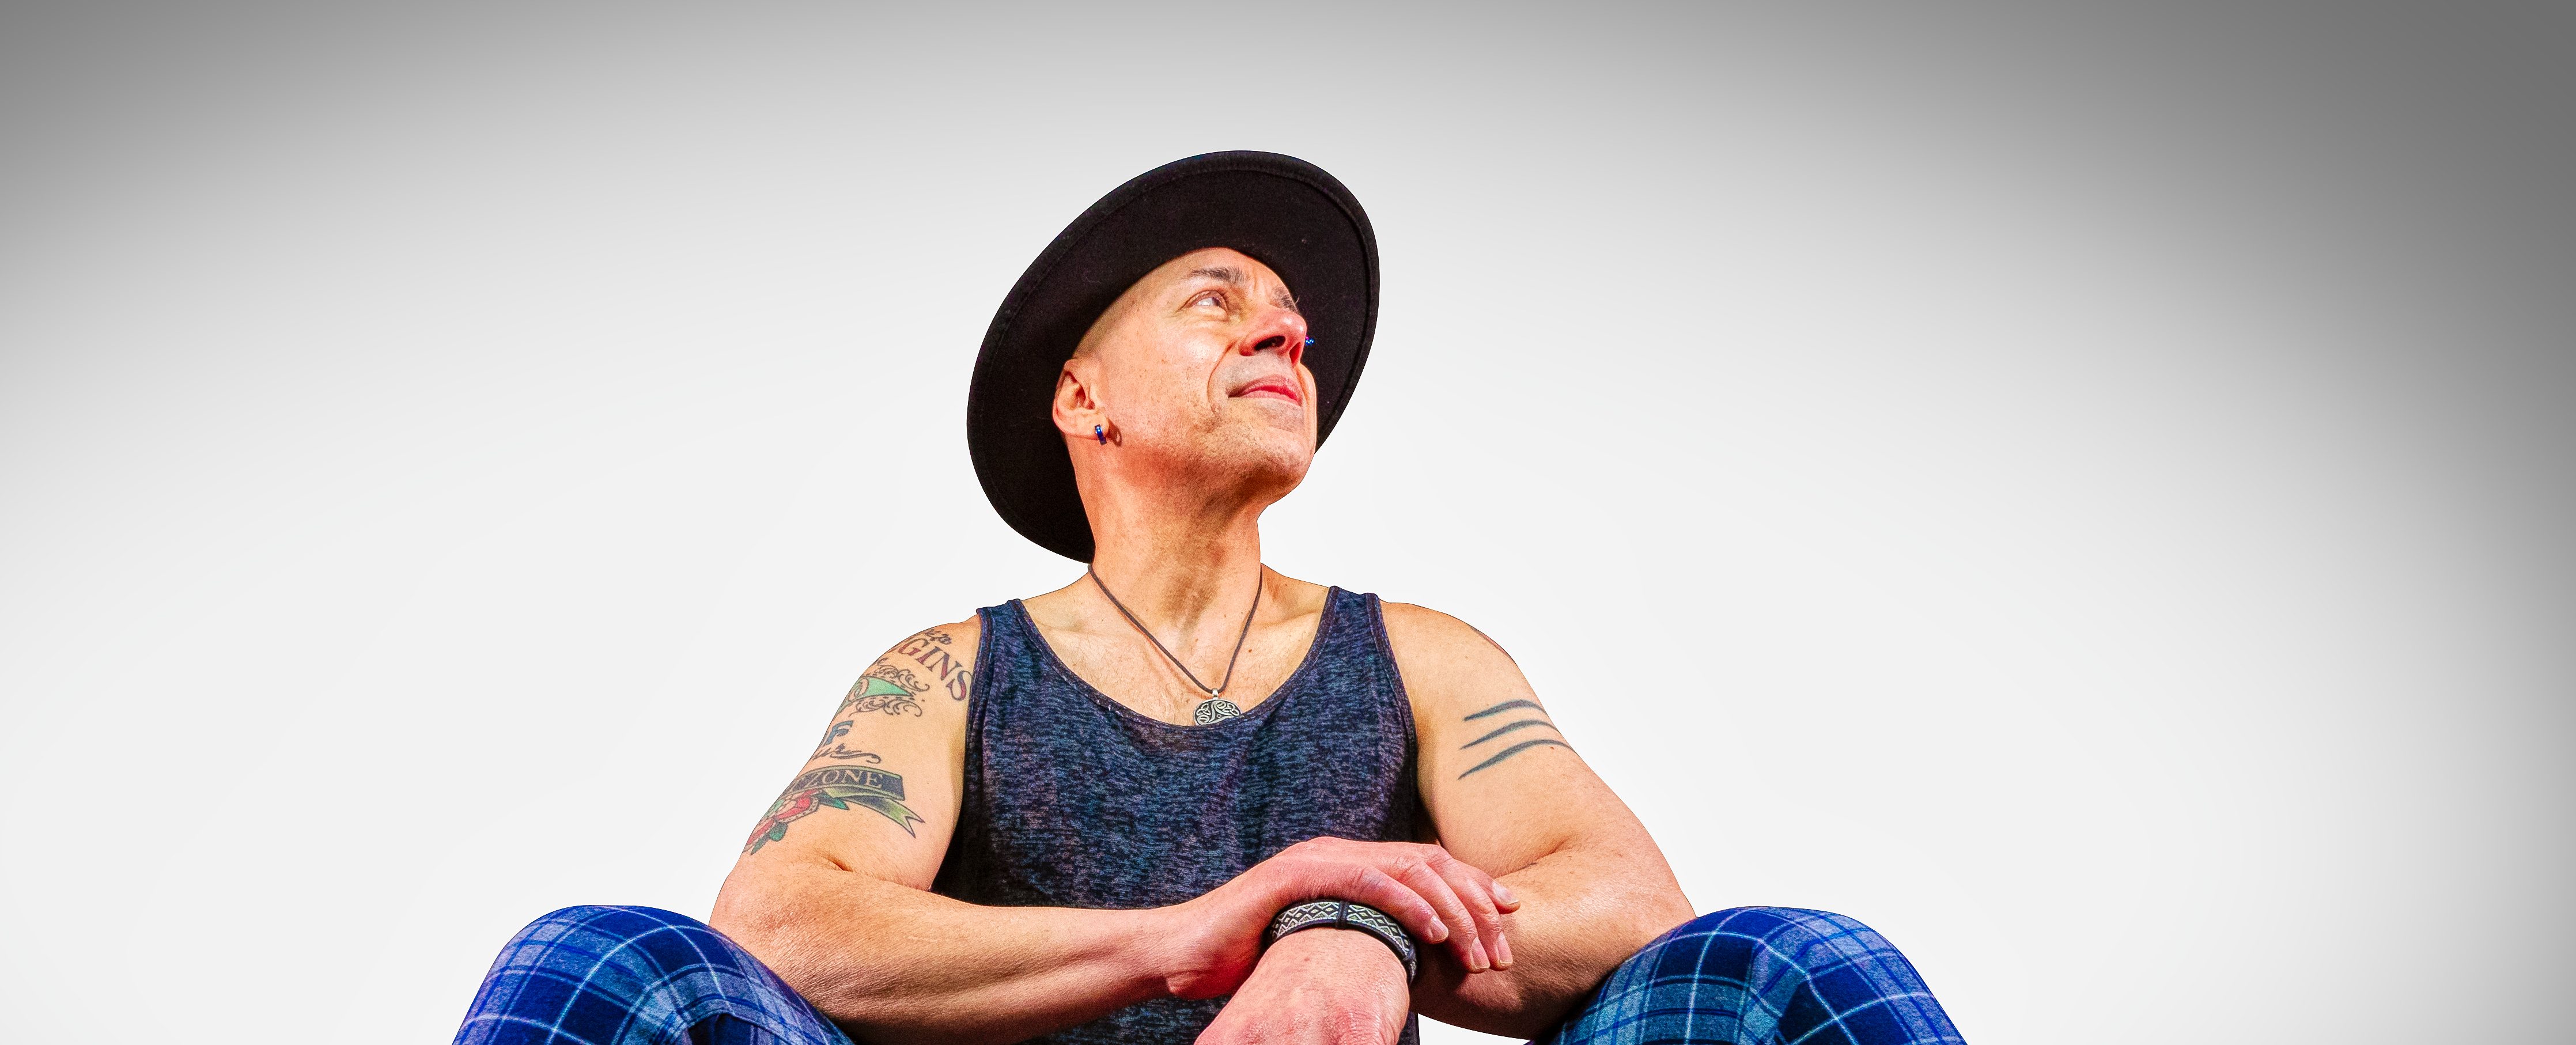 Dino Jag sits on a red seat. He wears blue and black plaid pants, a black singlet, a black wide-brimmed hat and has tattoos on his arms.